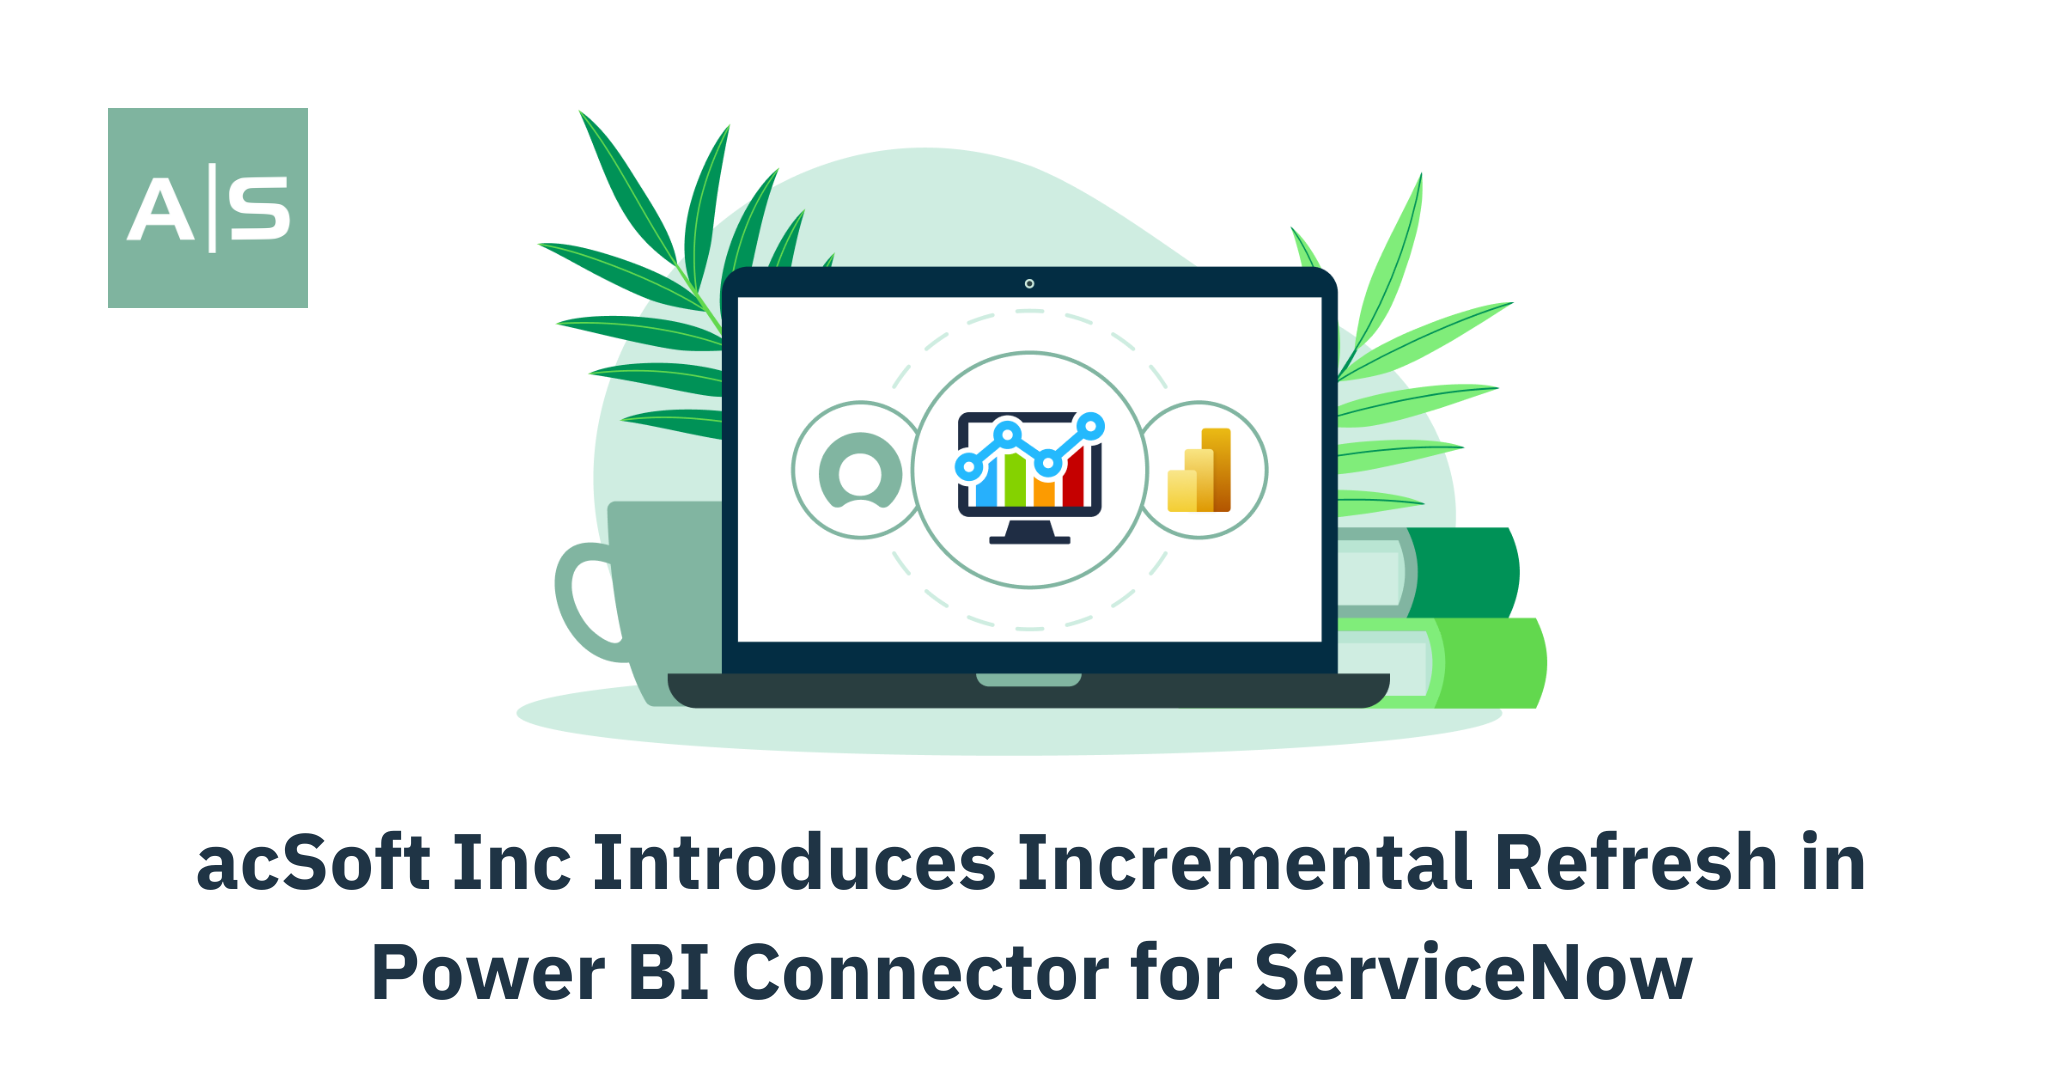 acSoft Inc Introduces Incremental Refresh in Power BI Connector for ServiceNow